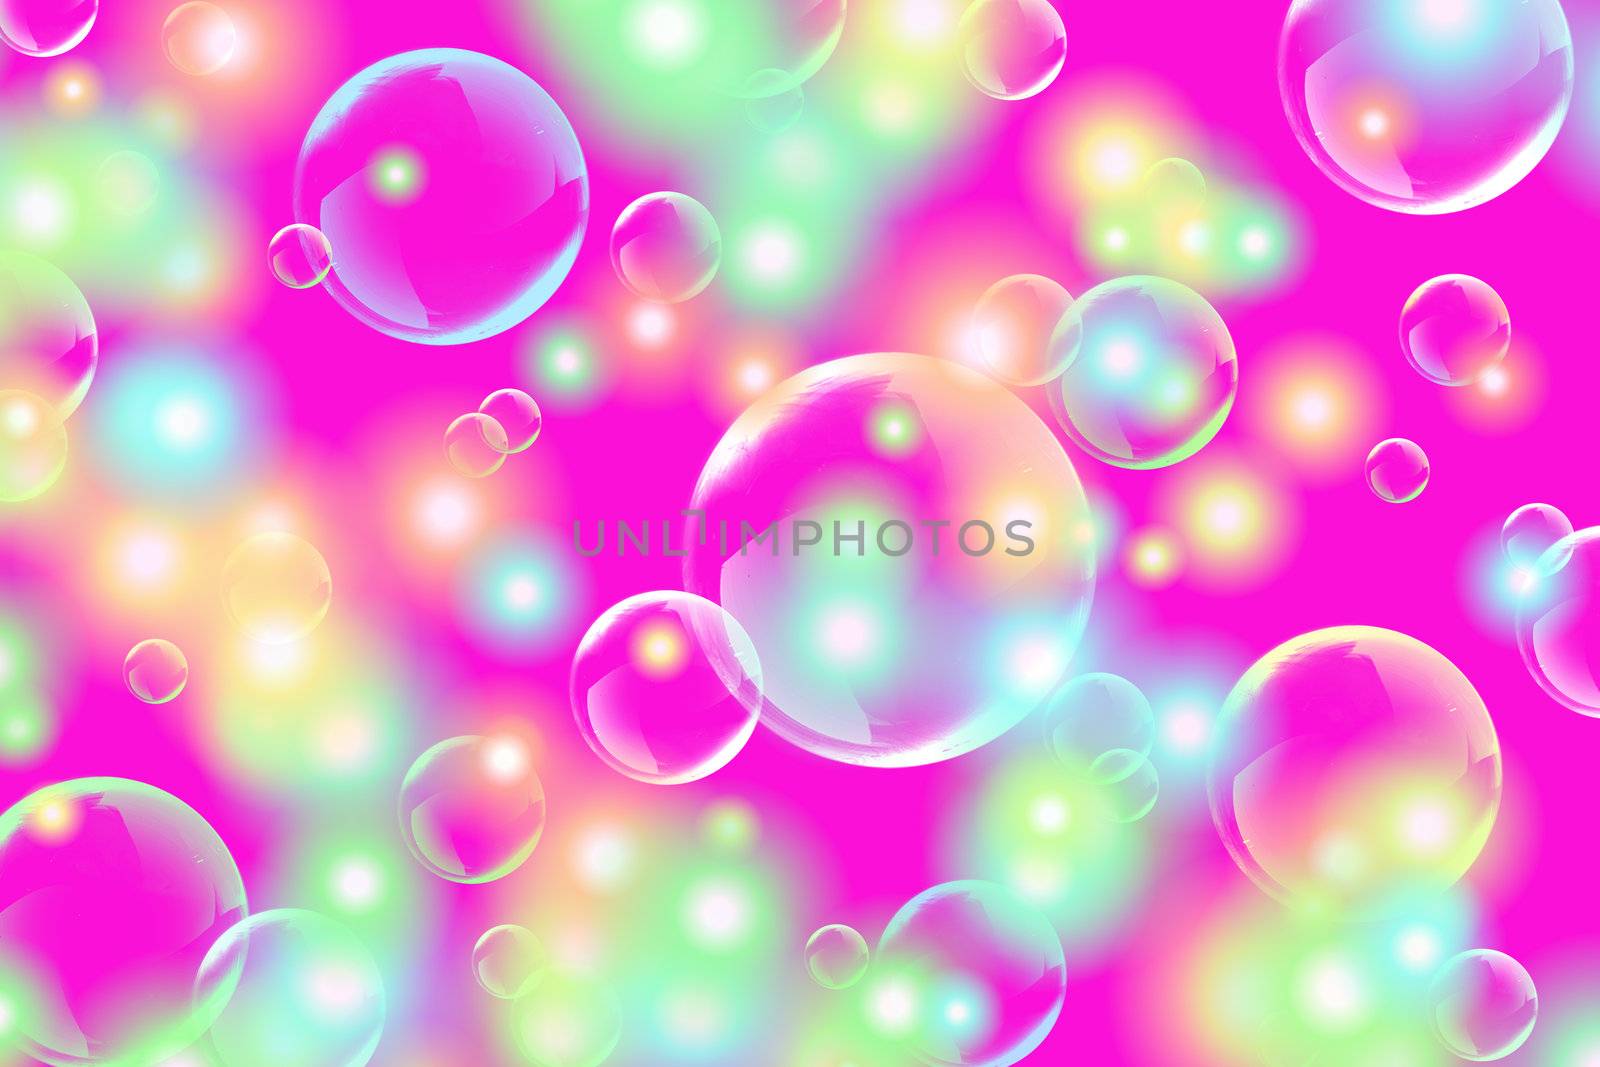 The soap bubbles fly on a multicolored background